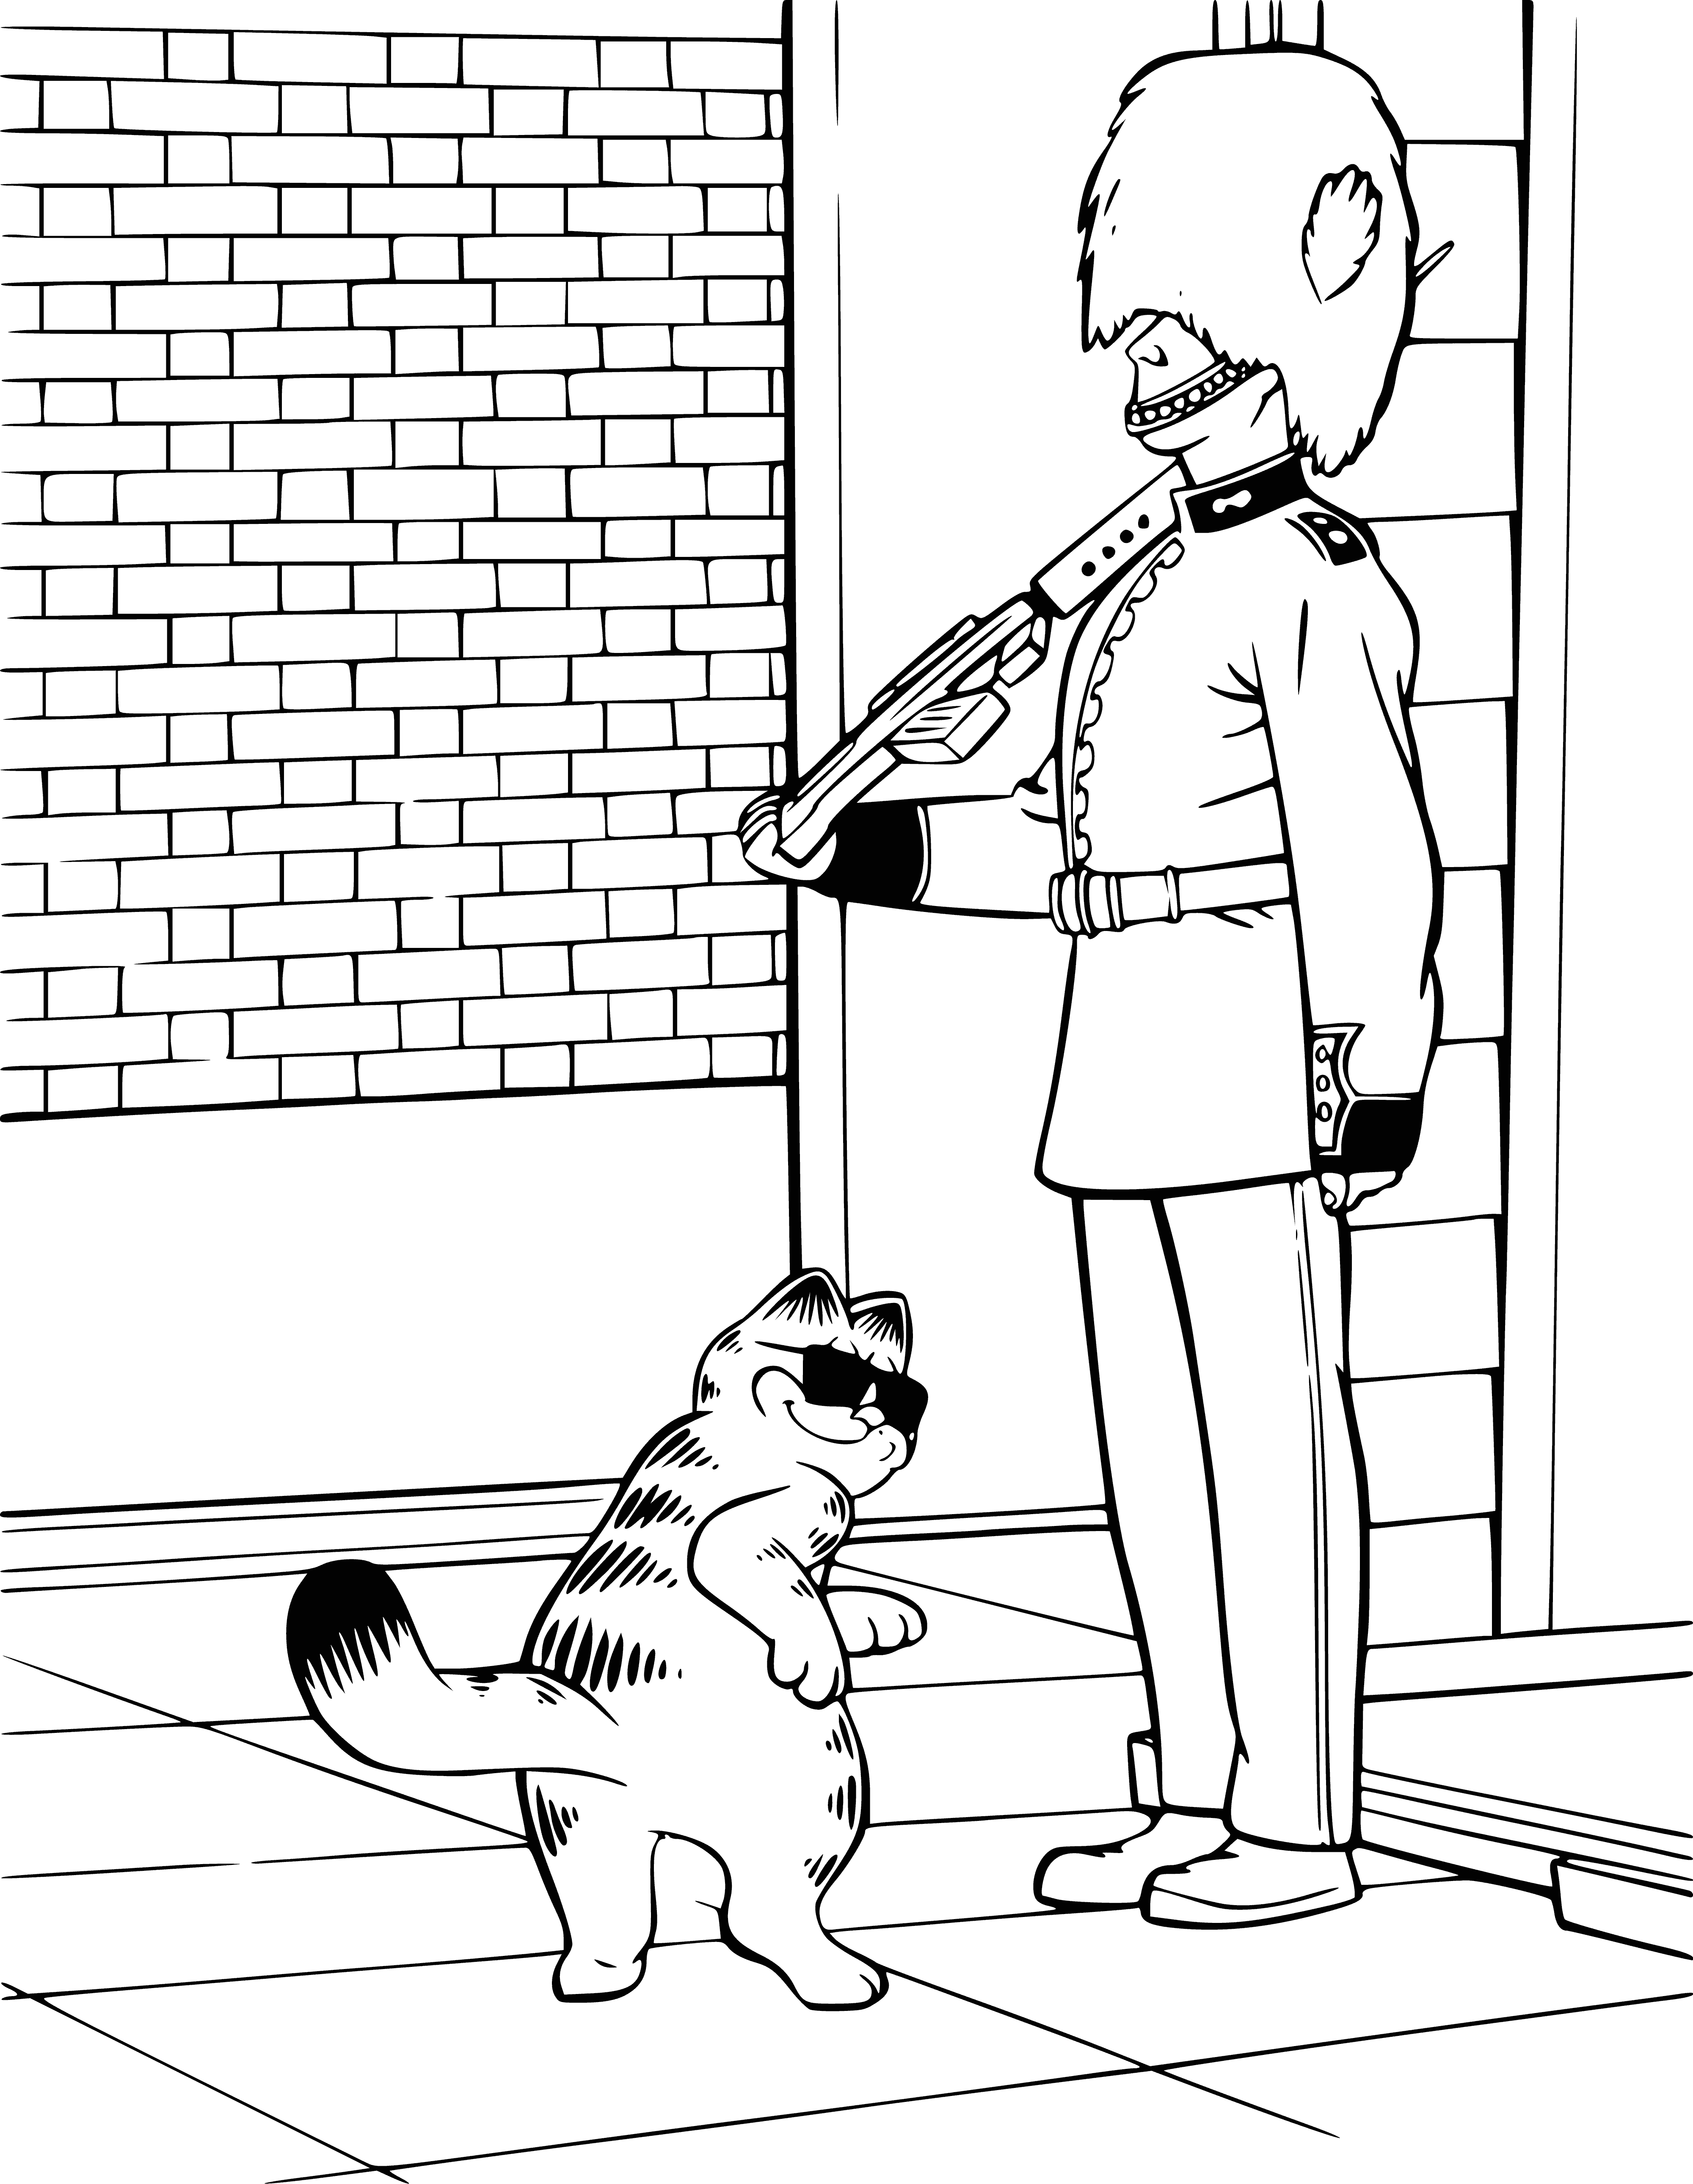 Garfield in London coloring page